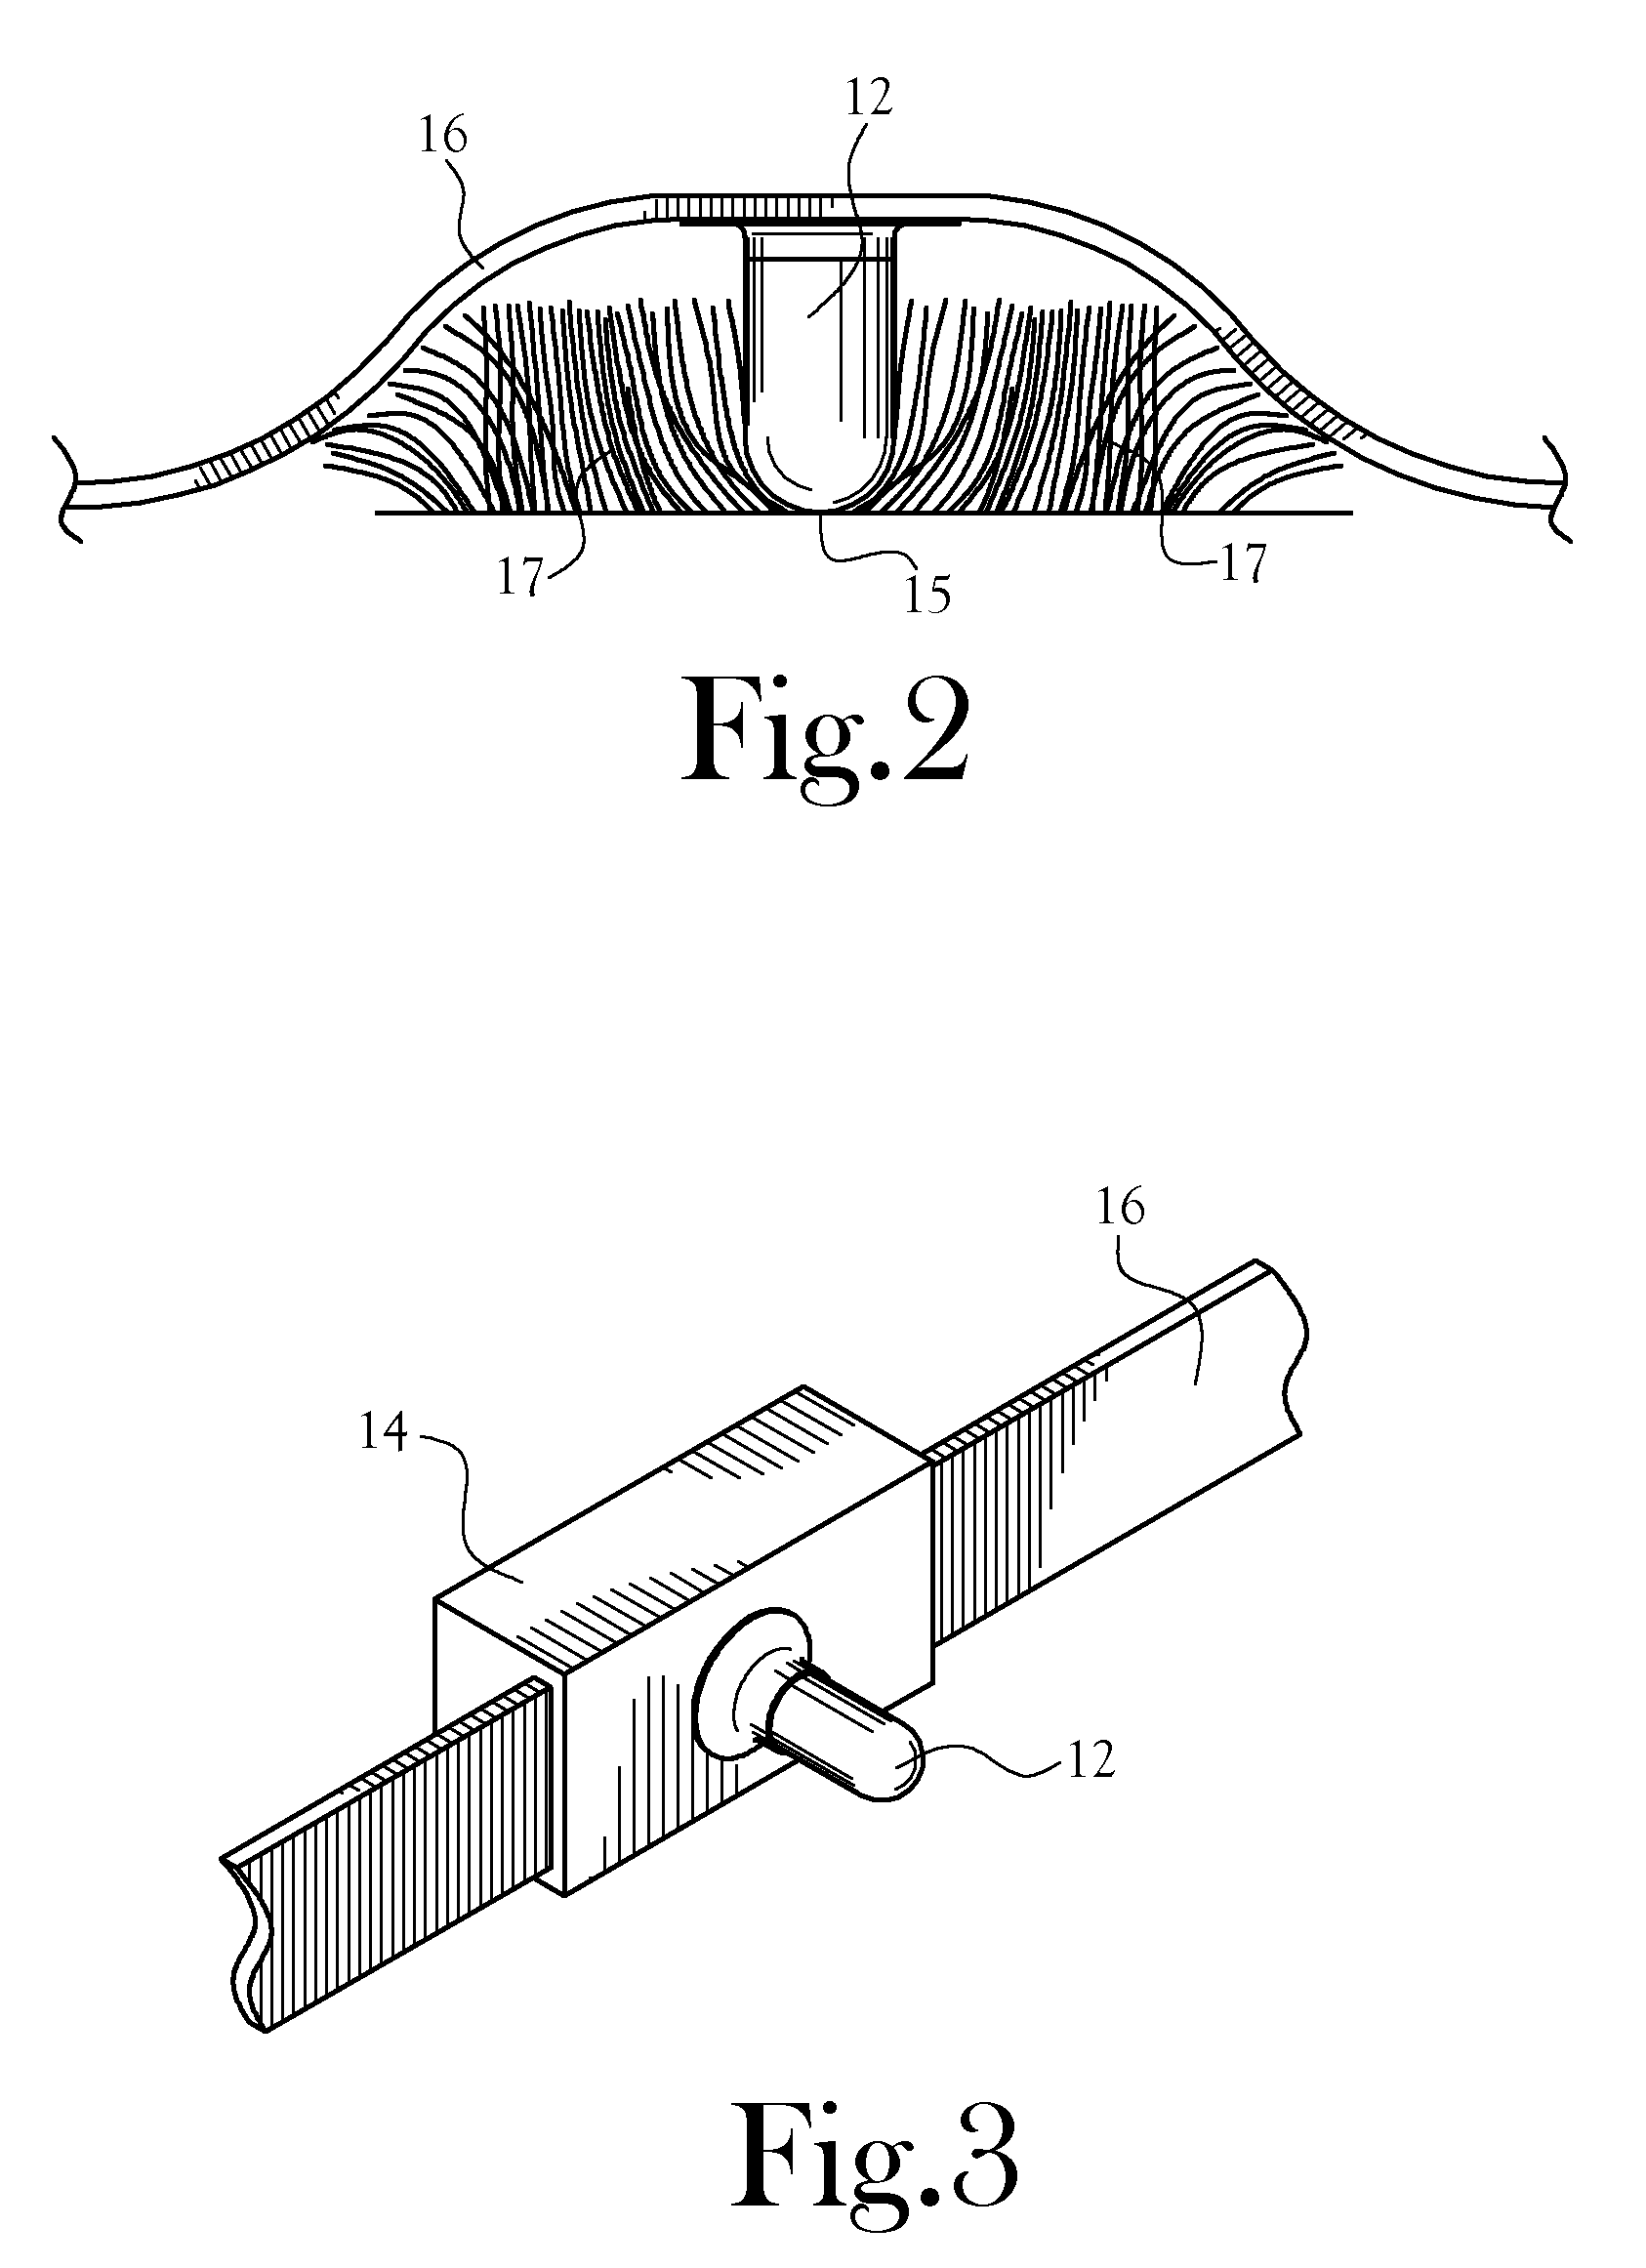 Animal Training Device Using a Vibration Probe to Deliver a Vibration Stimulus to an Animal